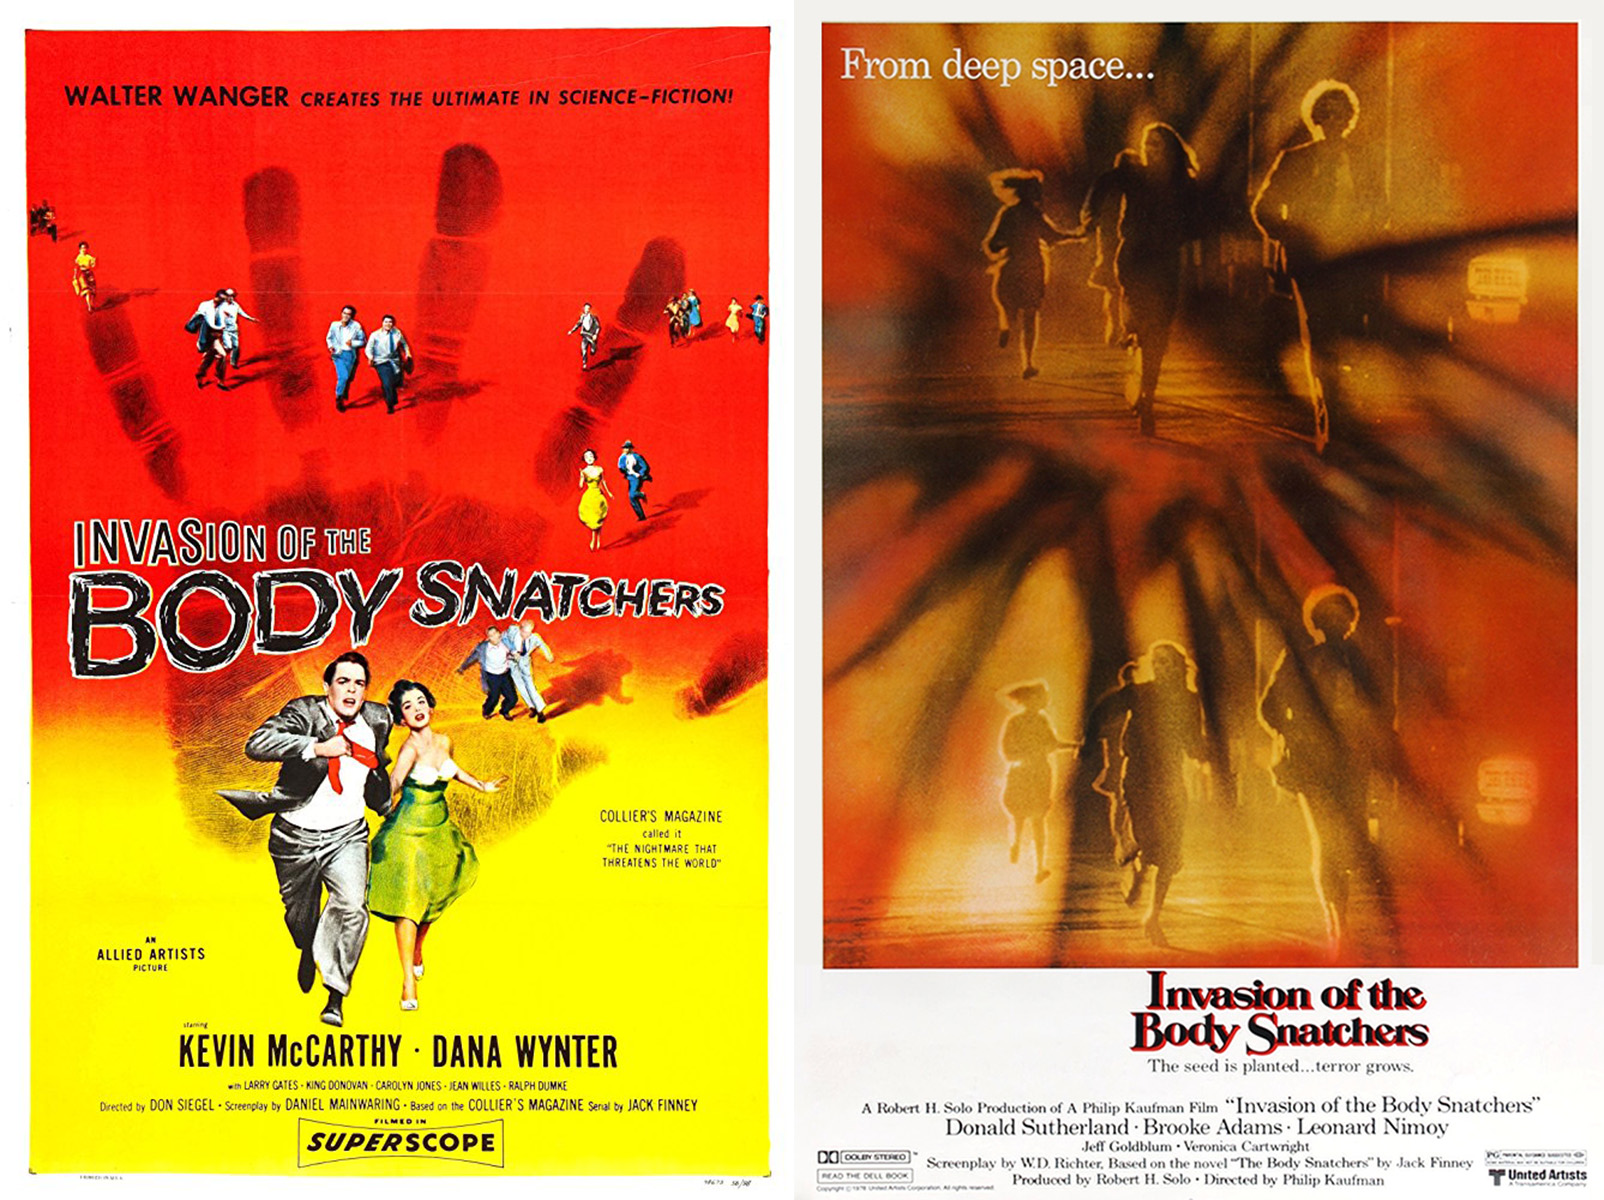 Invasion of the Body Snatchers: A Tale of Two Films - 1956 vs